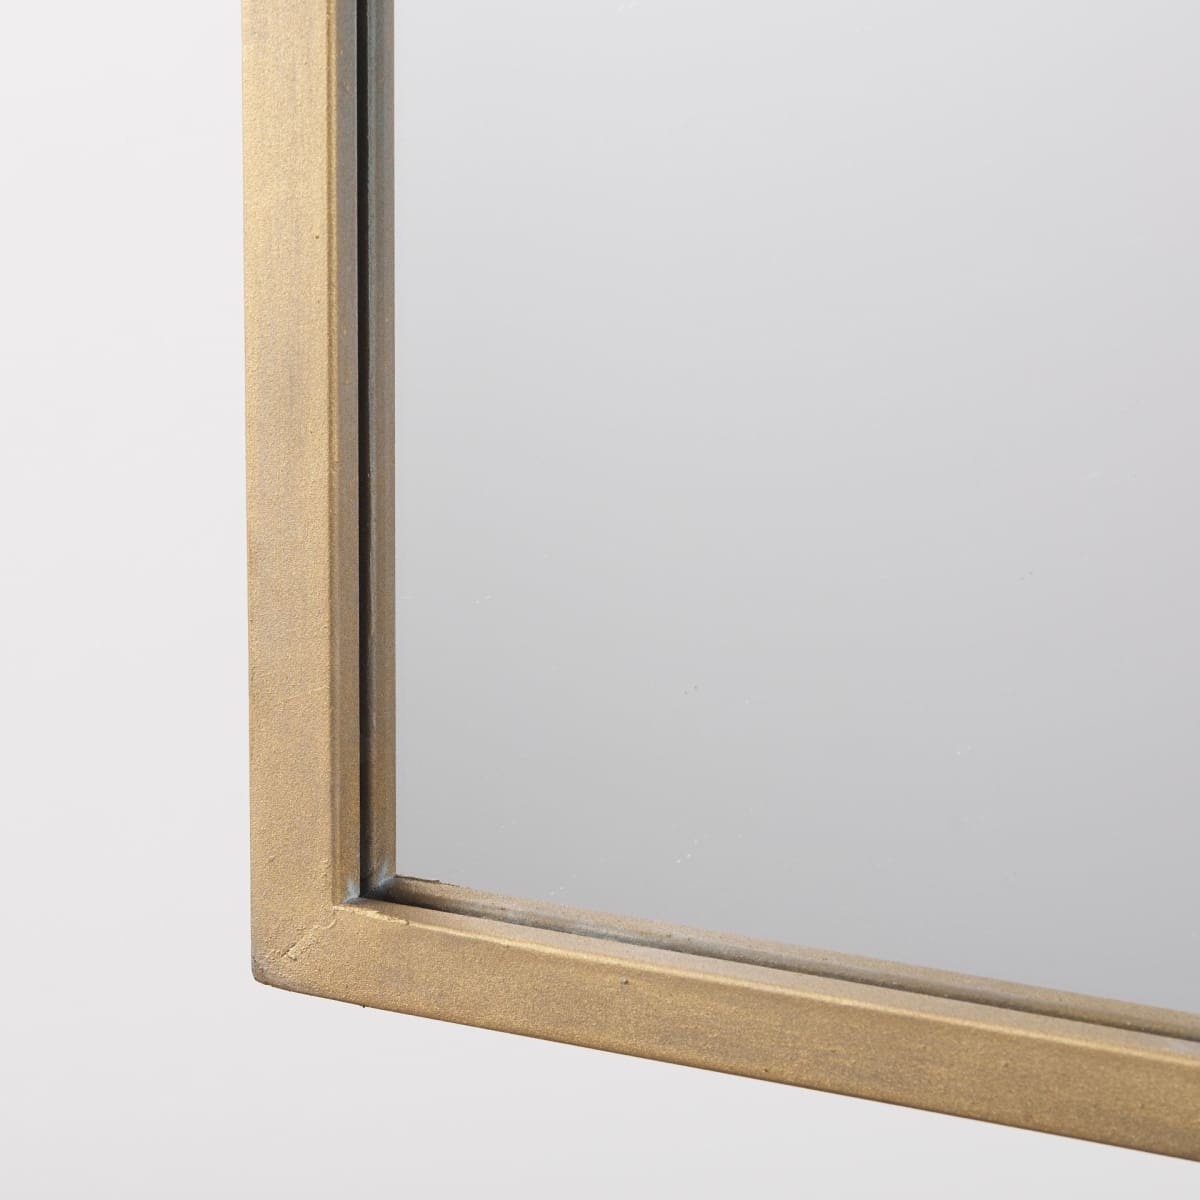 Giovanna Wall Mirror Gold Metal | Pointed Arch - wall-mirrors-grouped